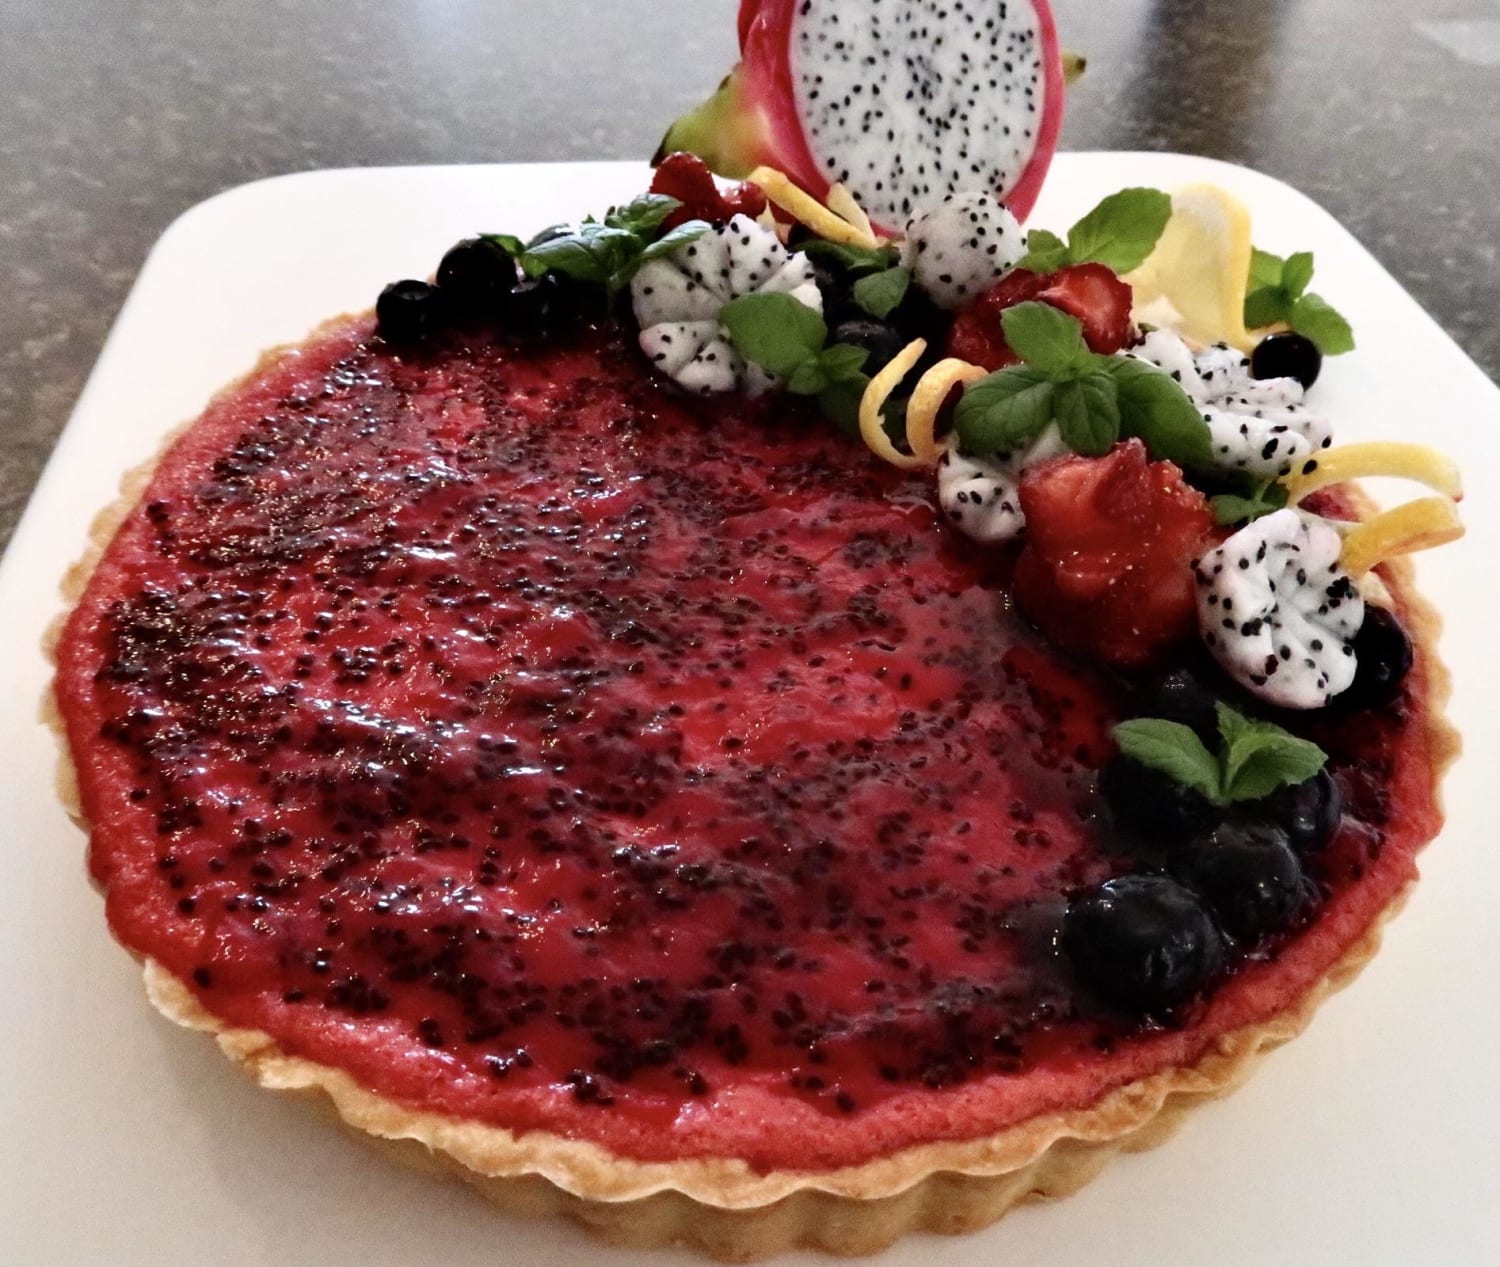 Red Dragon Fruit Lemon Curd Tart (Repost with picture)